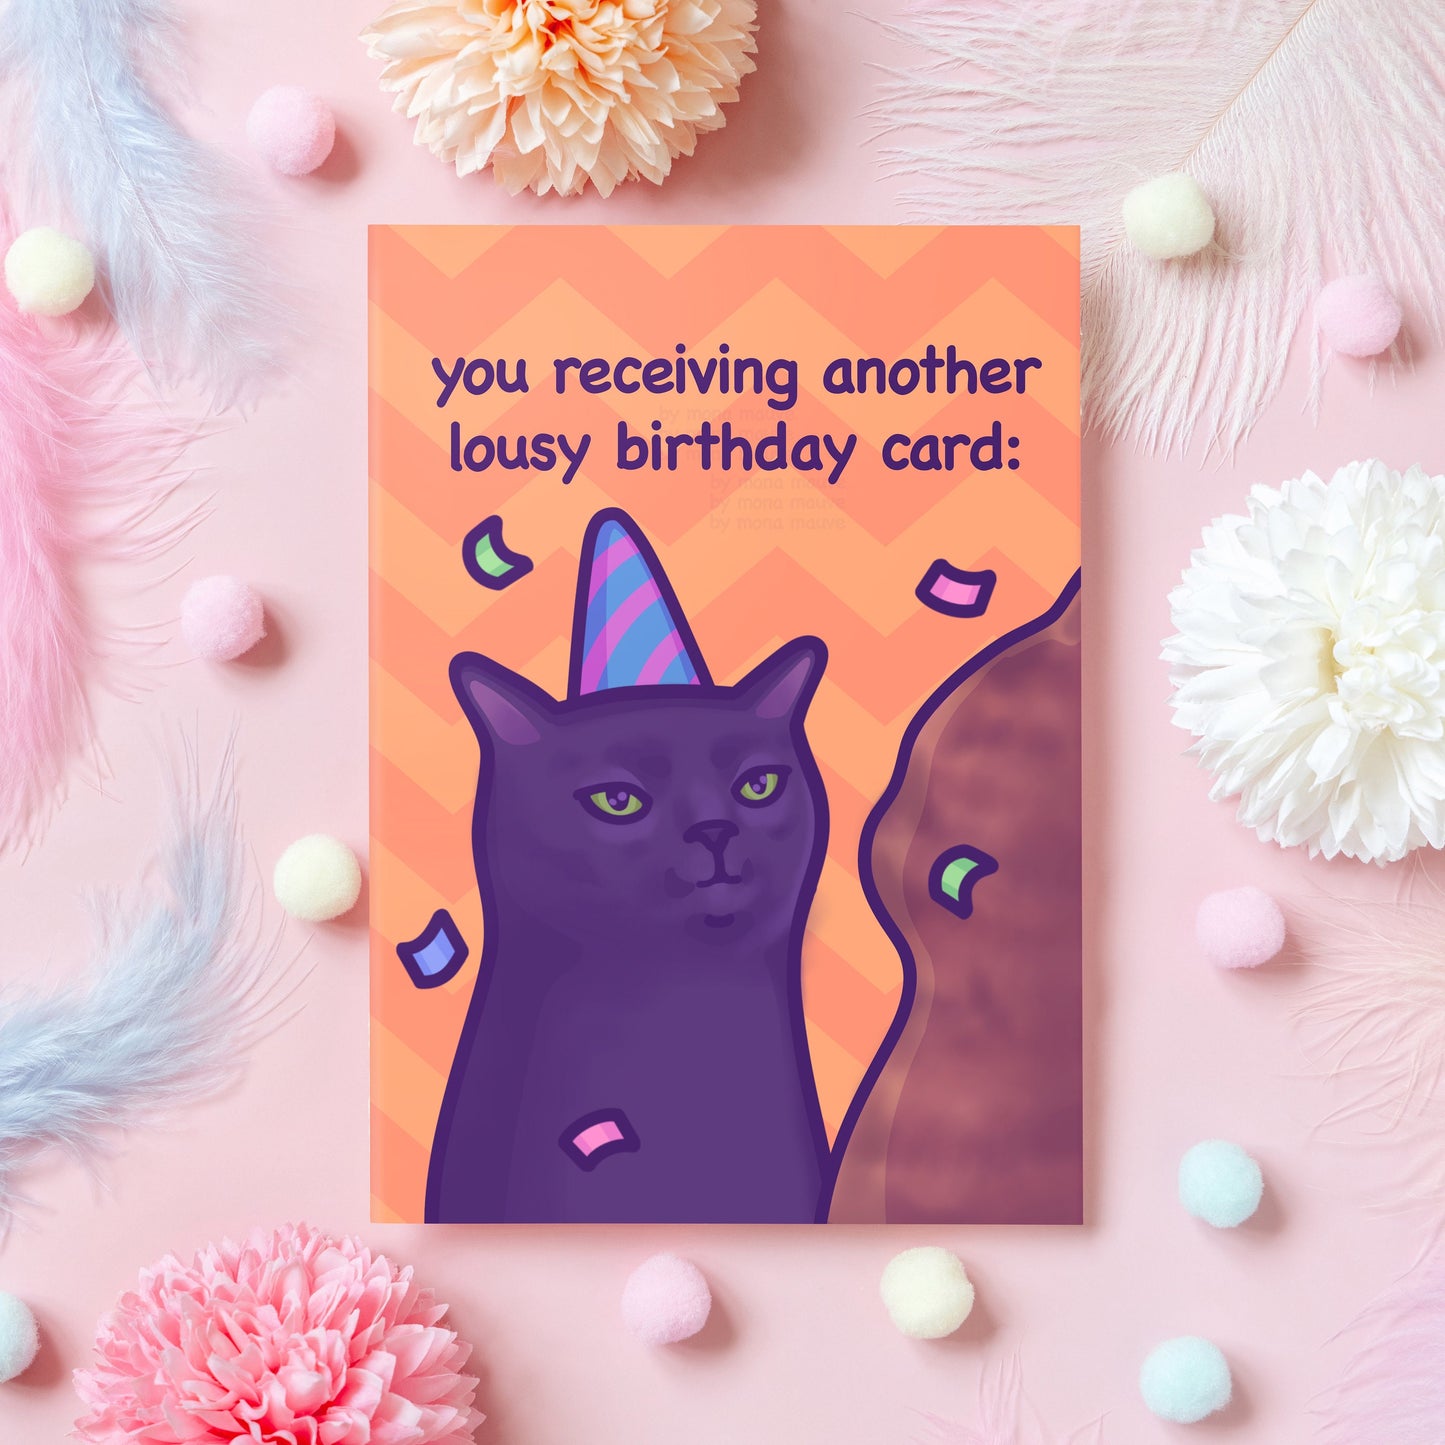 Funny Cat Meme Birthday Card | Black Cat Zoning Out | "Lousy" Birthday Gift for Boyfriend, Girlfriend, Husband, Wife - Her or Him